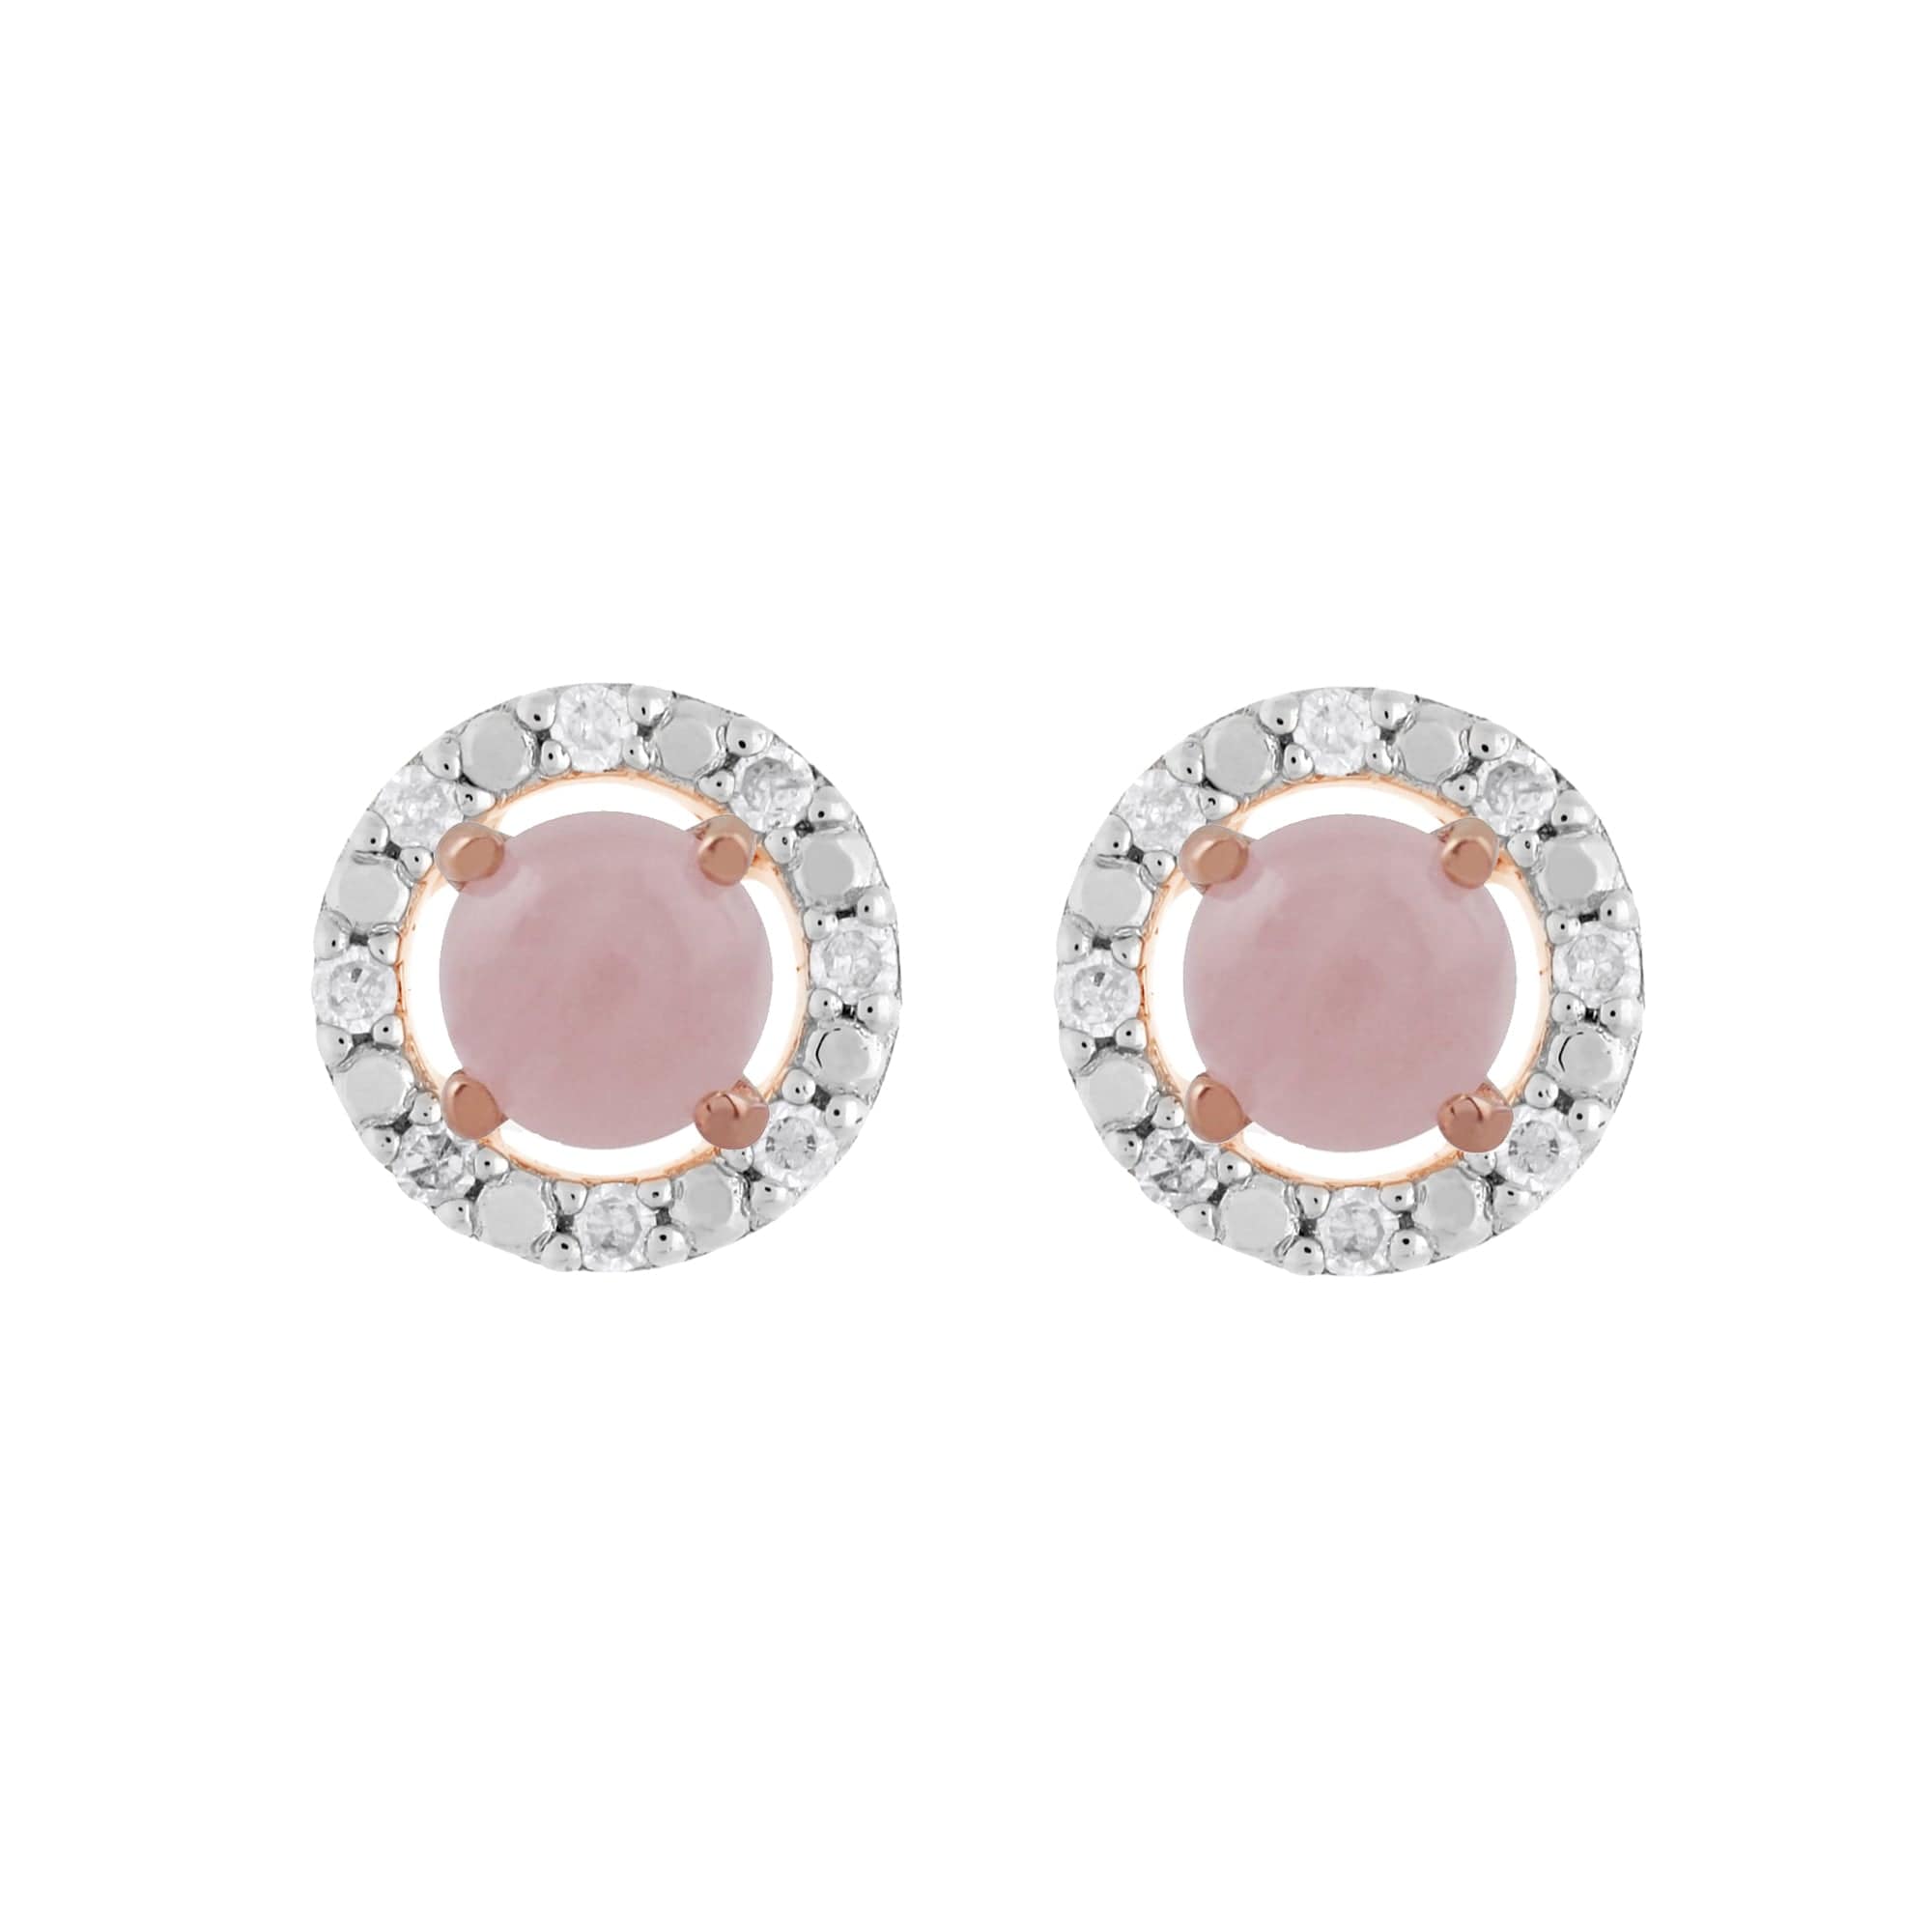 183E4316049-191E0377019 Classic Round Rose Quartz Stud Earrings with Detachable Diamond Round Ear Jacket in 9ct Rose Gold 1